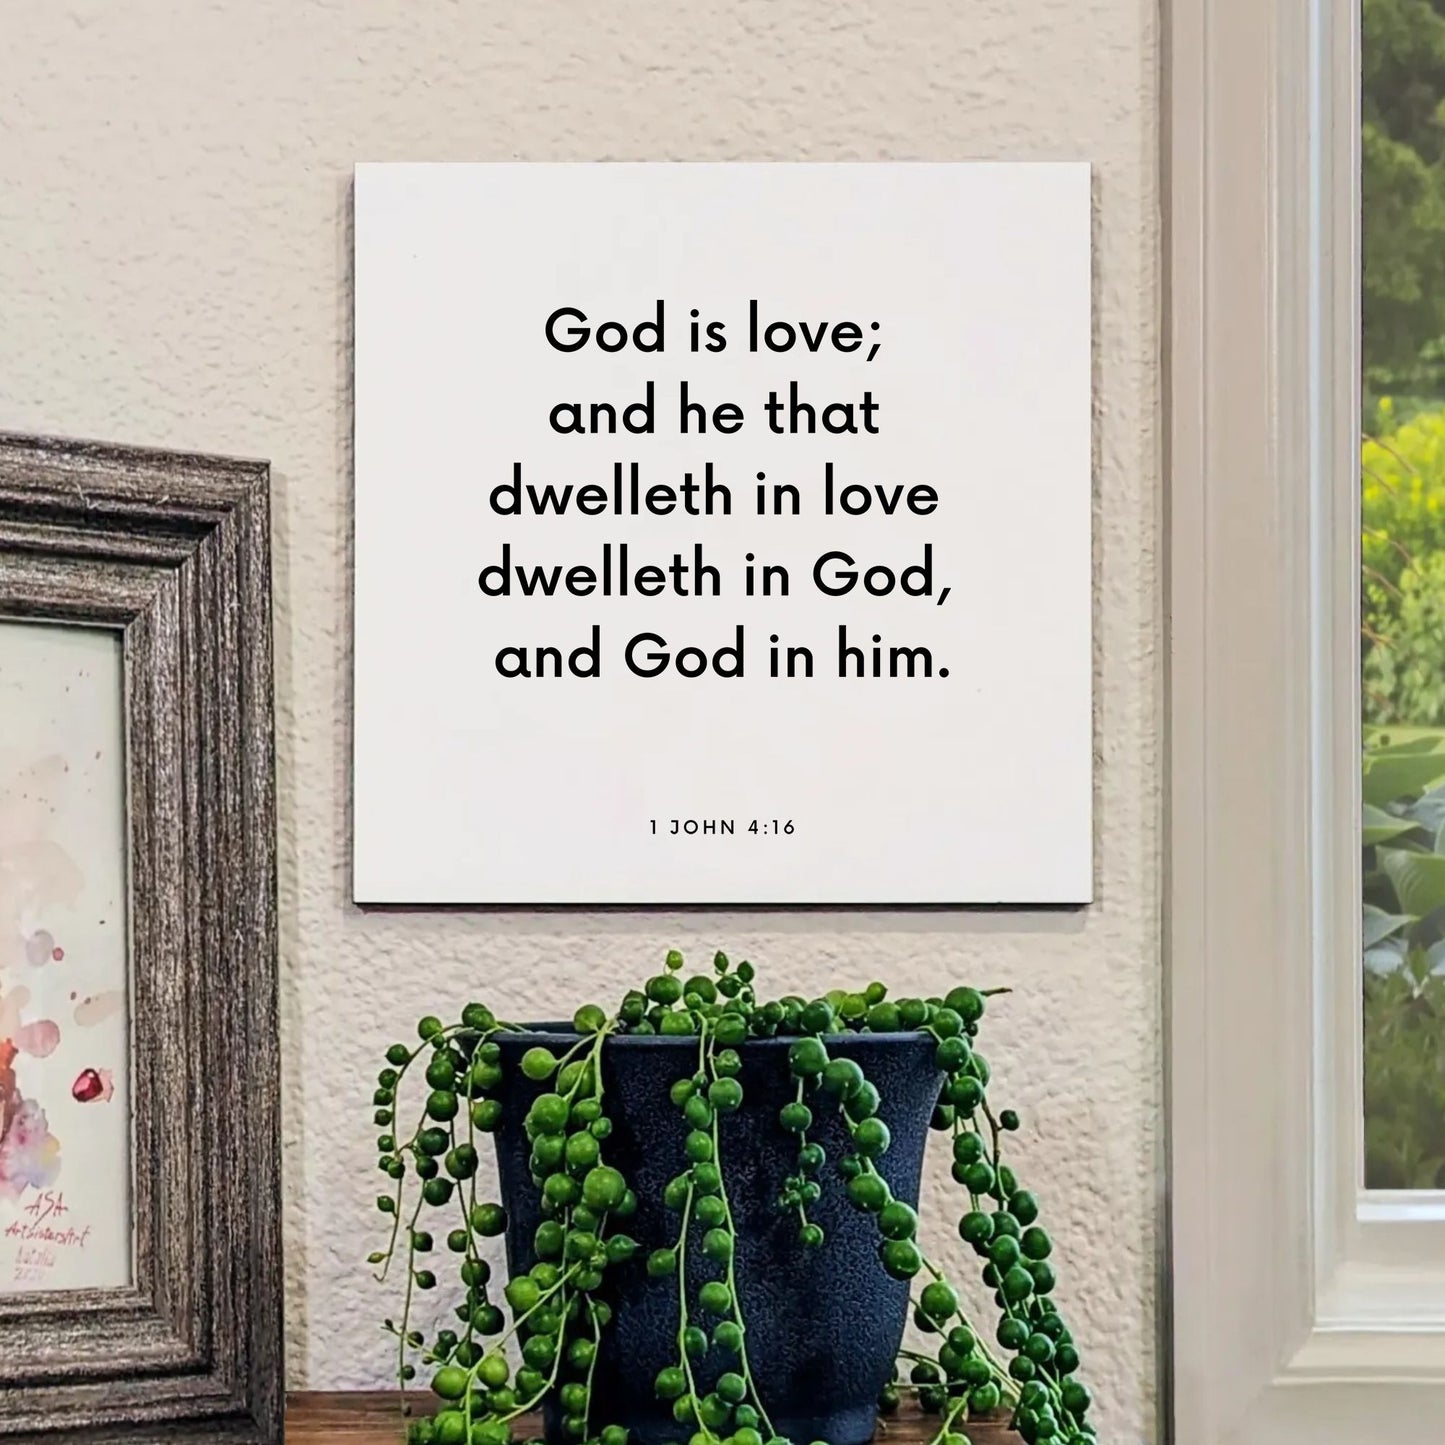 Window mouting of the scripture tile for 1 John 4:16 - "He that dwelleth in love dwelleth in God"